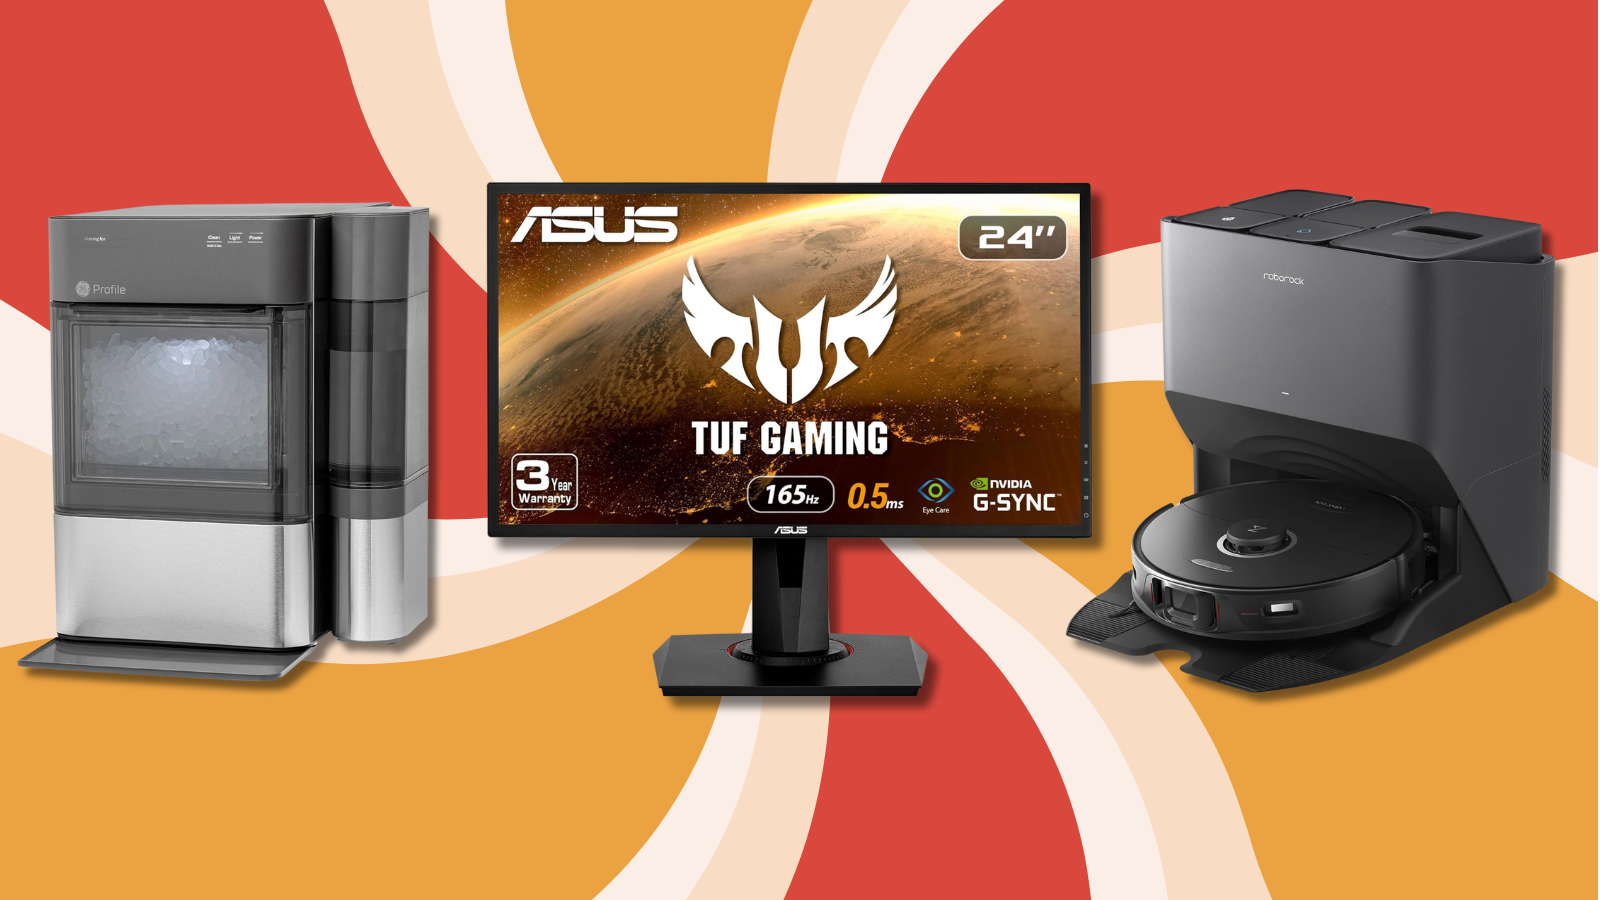 GE Profile ice maker, ASUS gaming monitor, and Roborock robot vacuum with orange, white, and red swirl background